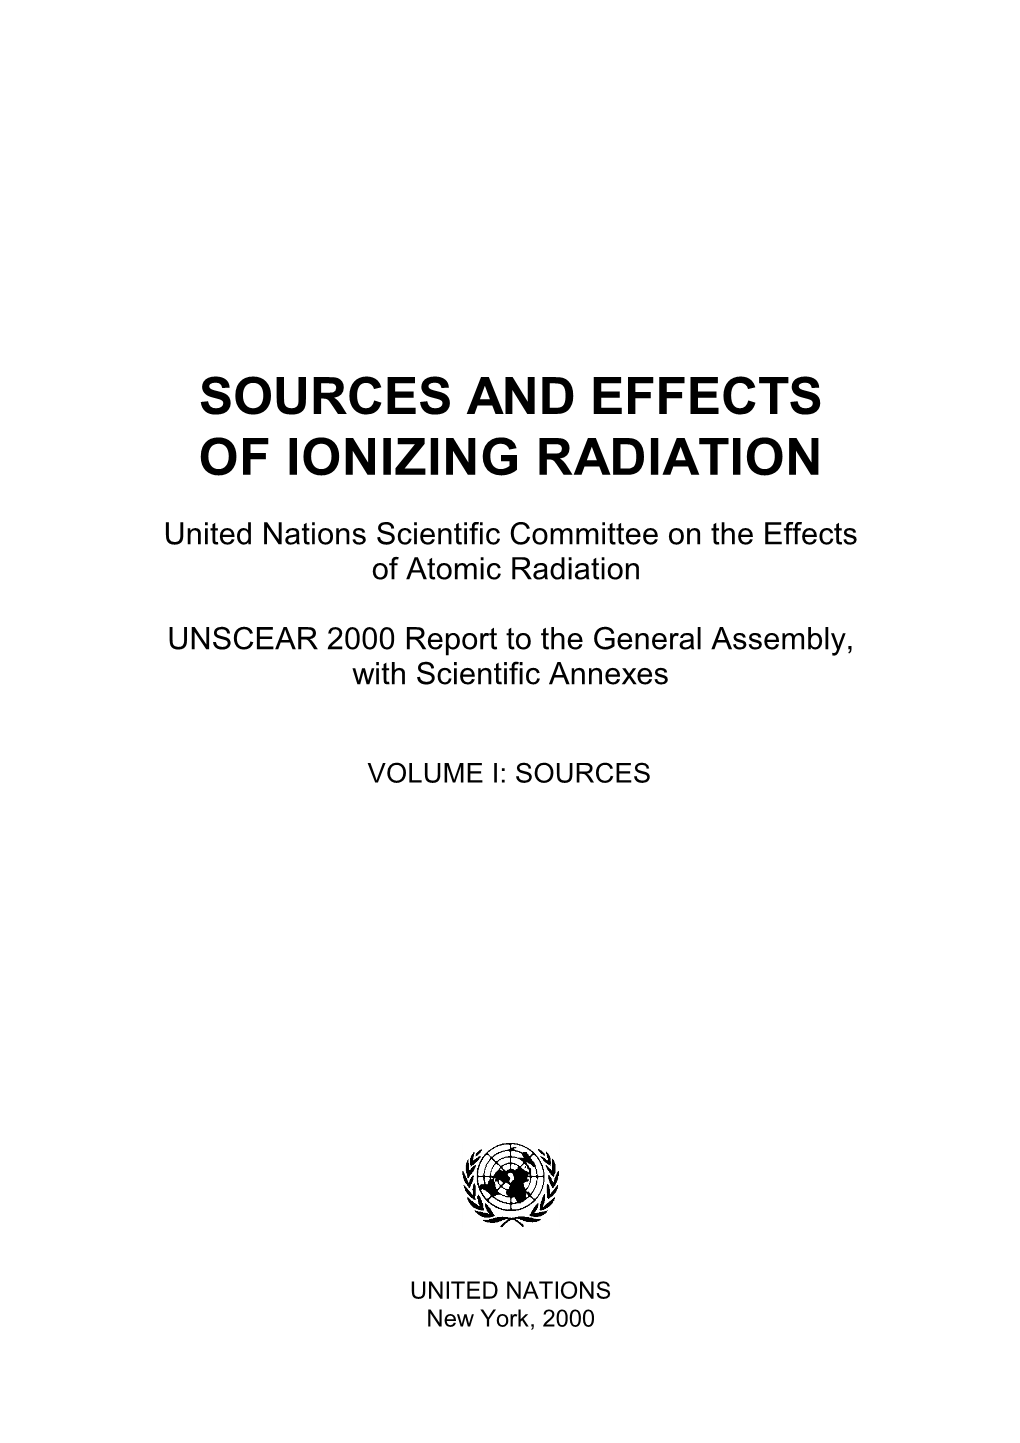 UNSCEAR 2000 Report to the General Assembly, with Scientific Annexes